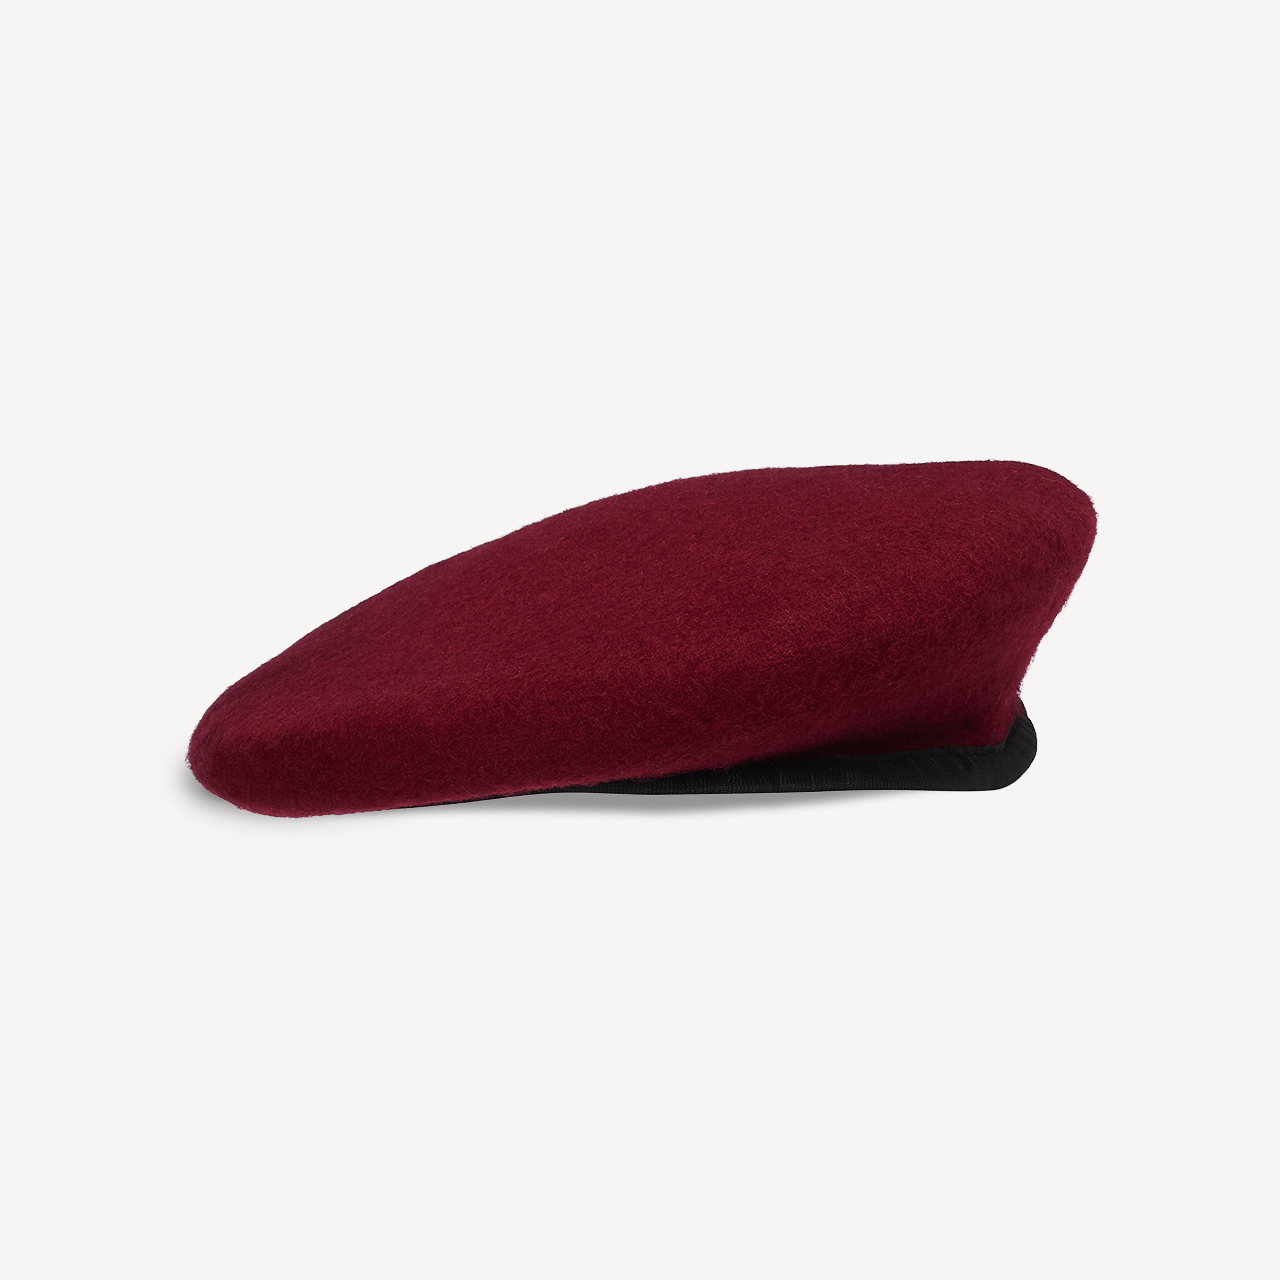 Military Beret in Maroon - Swaine